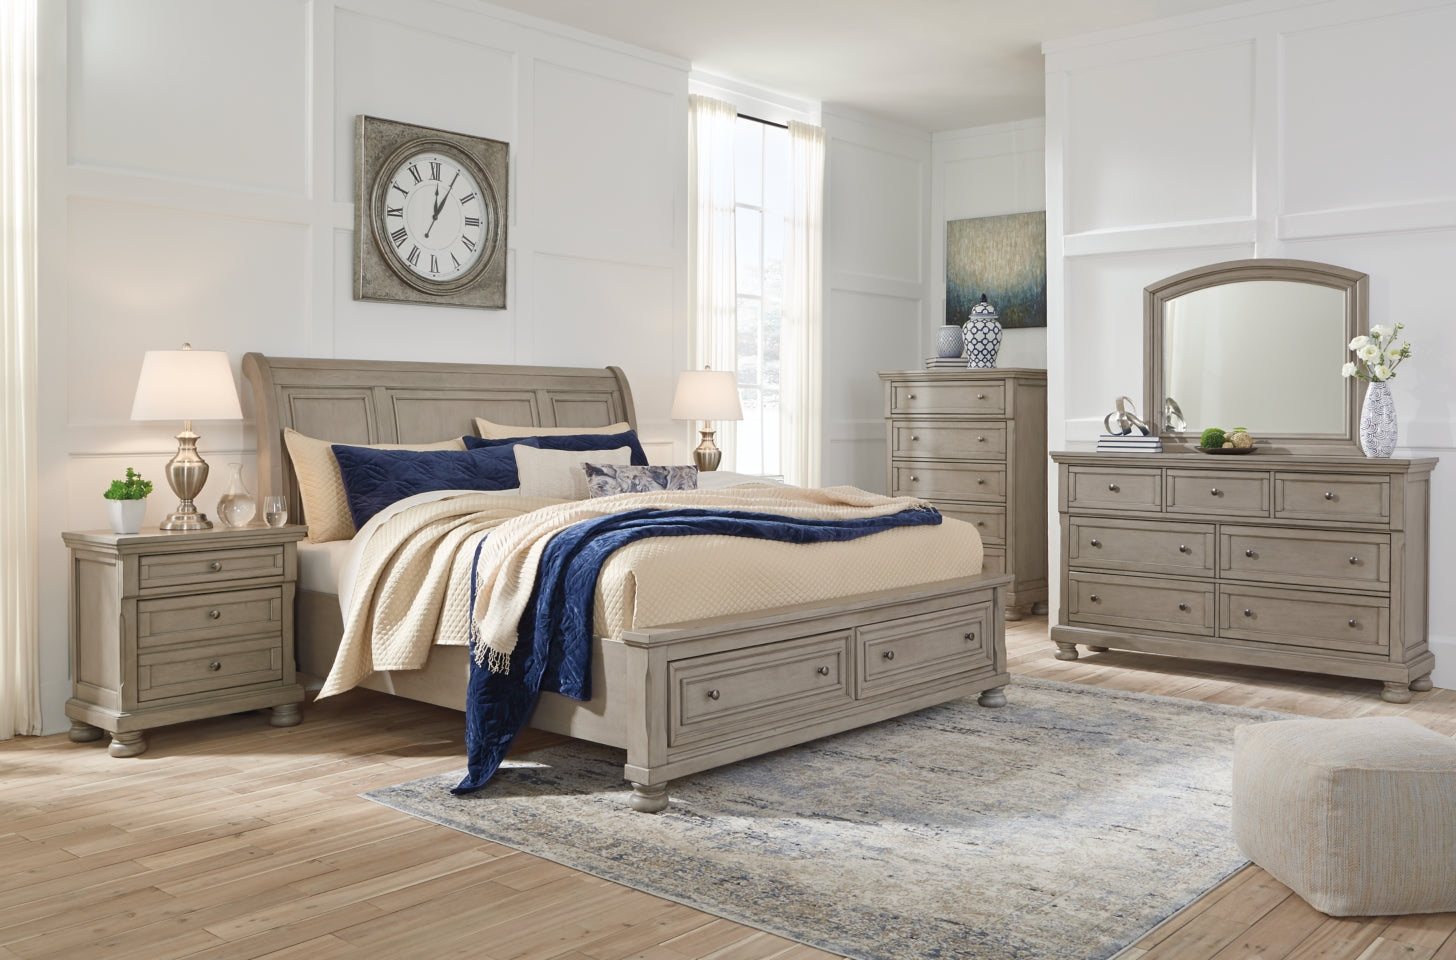 Lettner Dresser and Mirror - furniture place usa